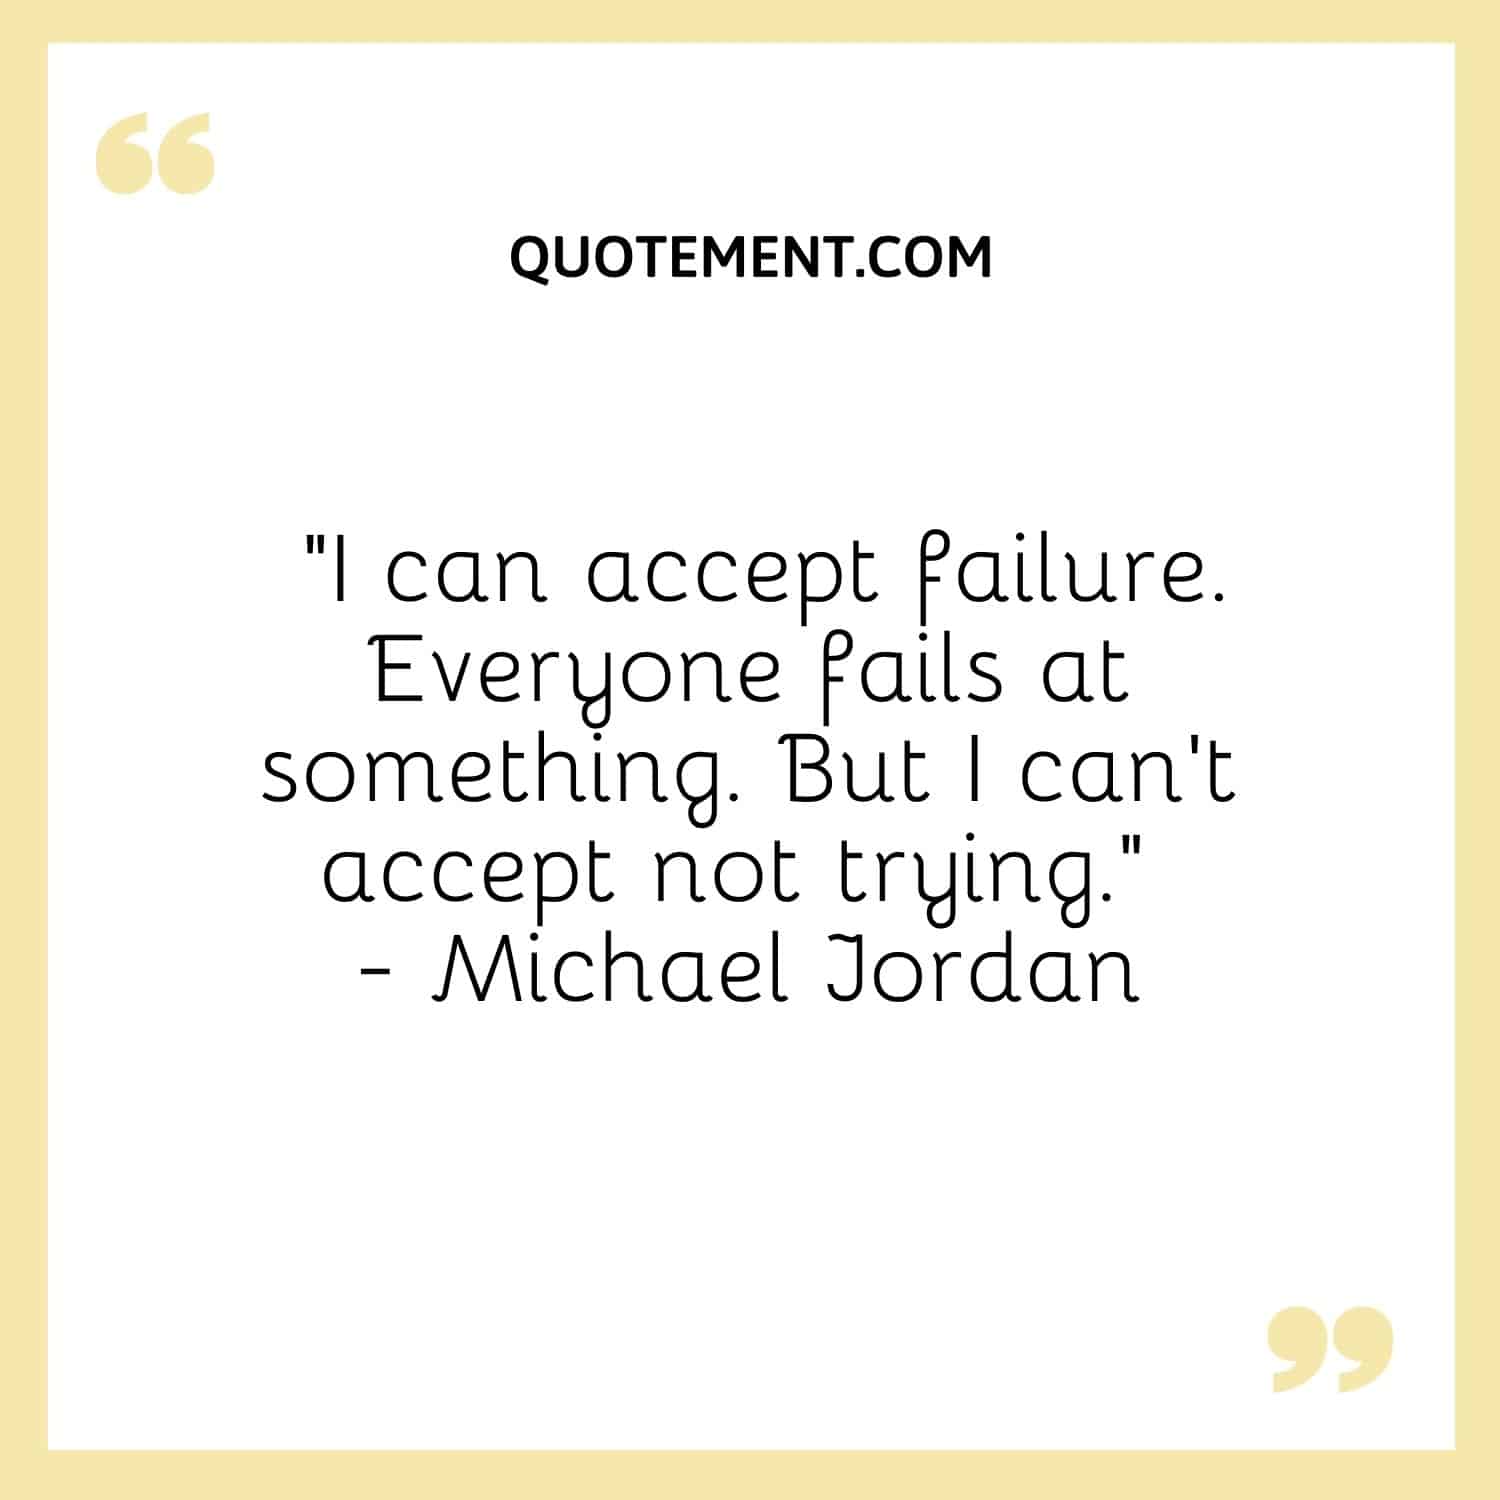 “I can accept failure. Everyone fails at something. But I can’t accept not trying.“ — Michael Jordan